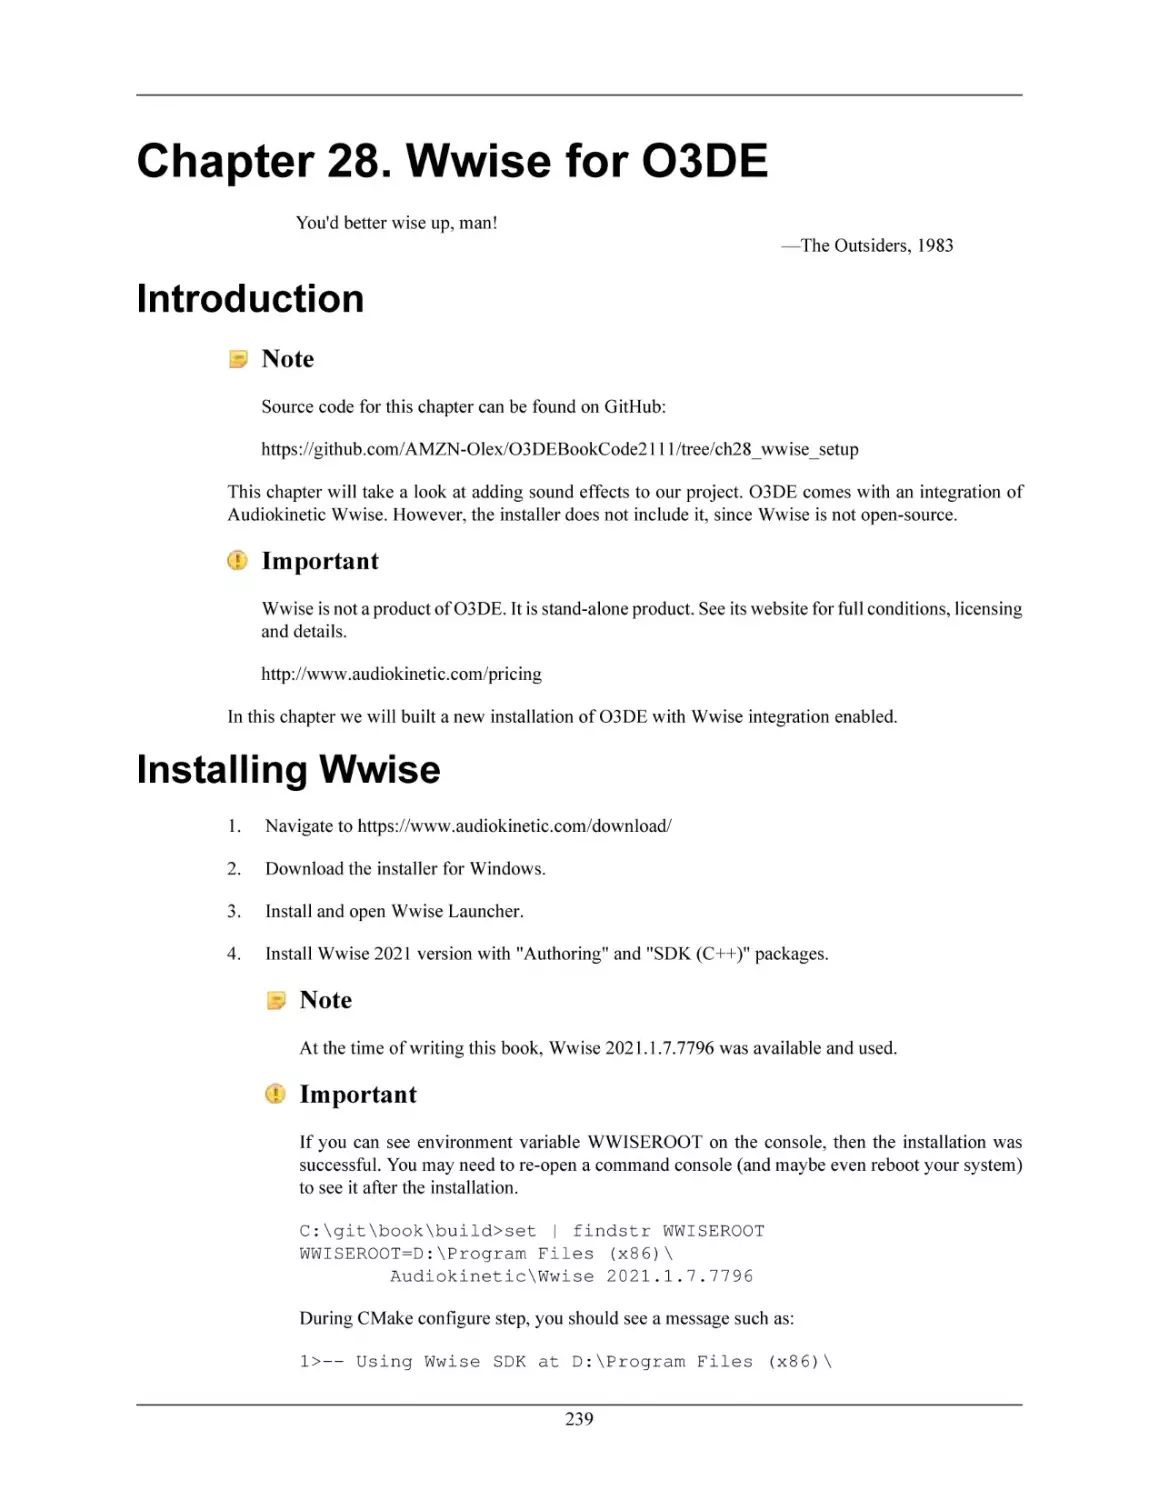 Chapter 28. Wwise for O3DE
Introduction
Installing Wwise